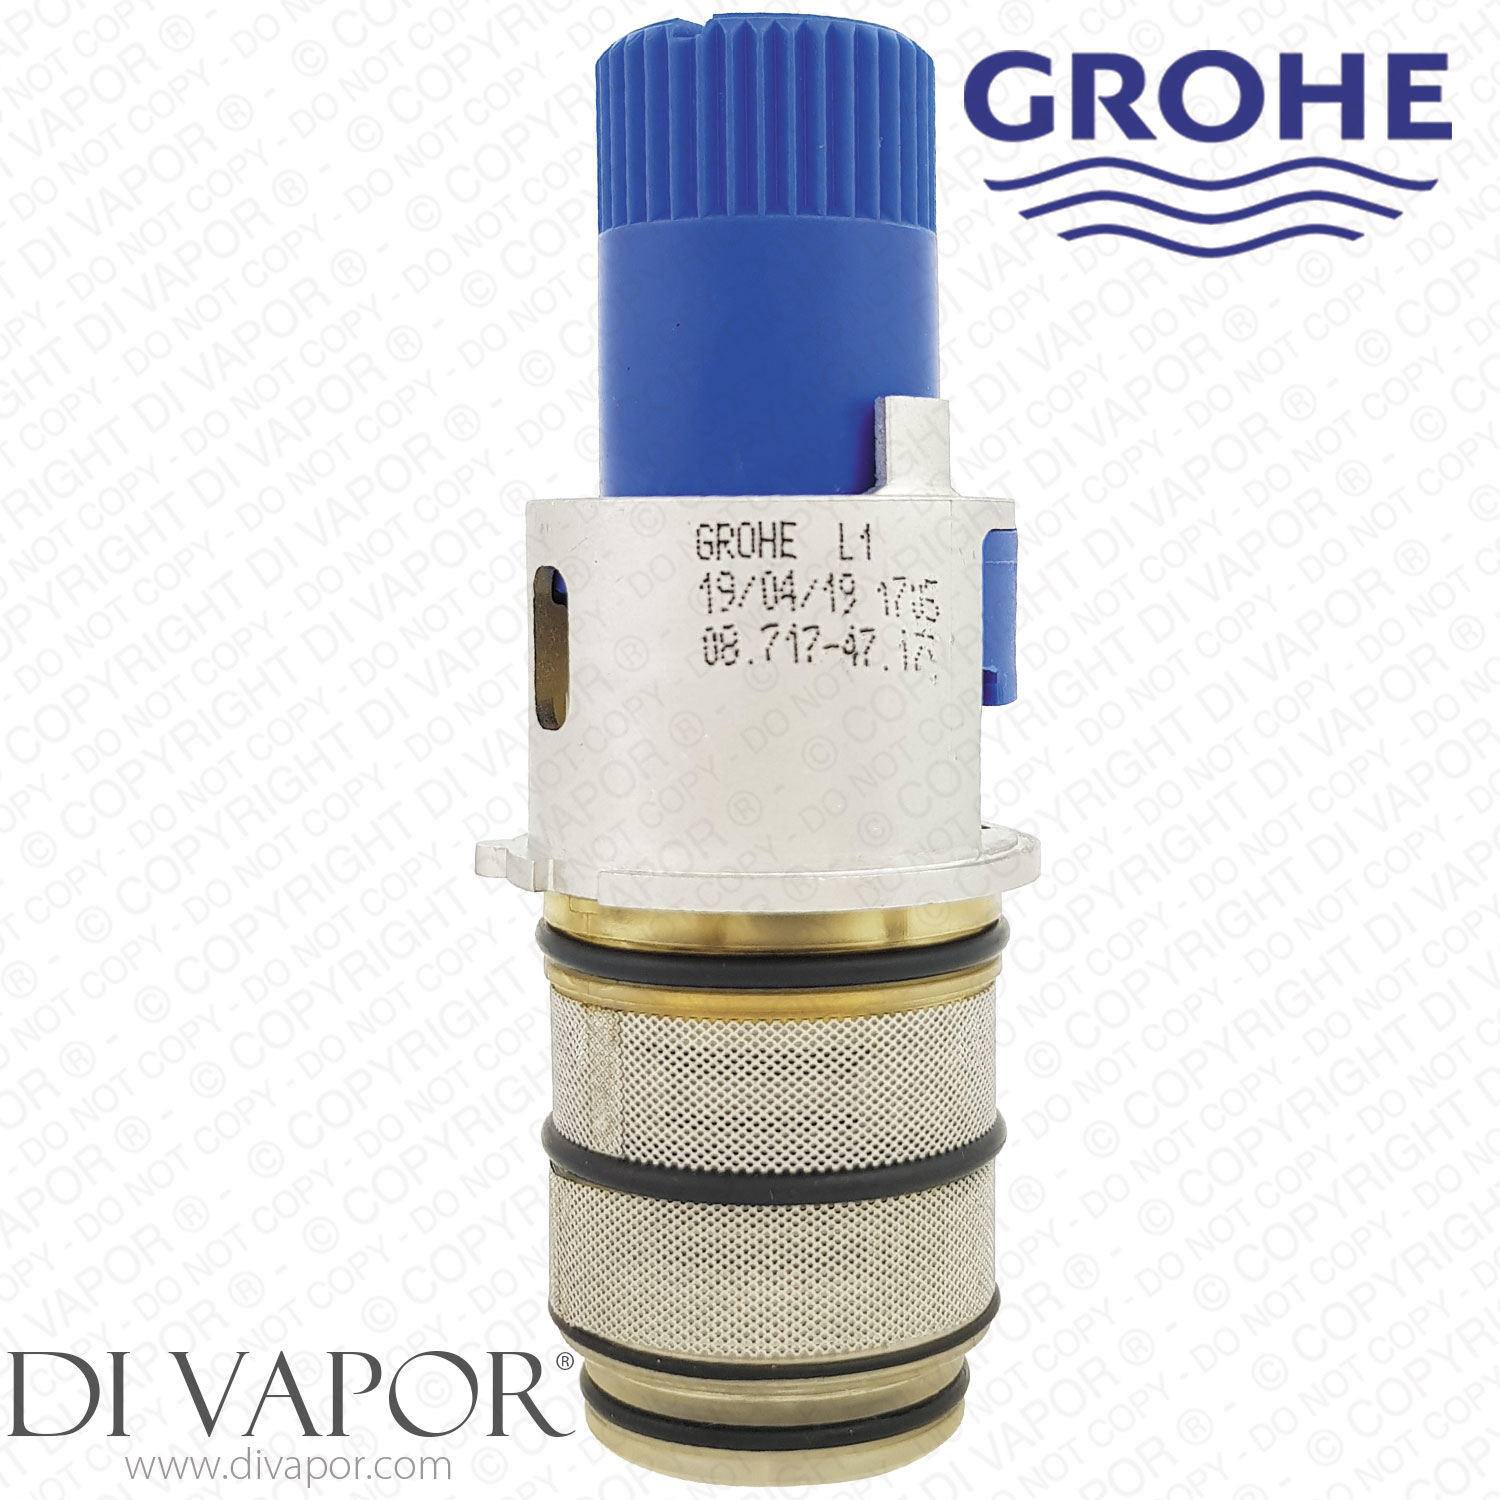 beroemd Hallo Civic Grohe 47175000 1/2" Reverse Turbostat Thermostatic Cartridge for Grohtherm,  Allure, THM and Rainshower Valves